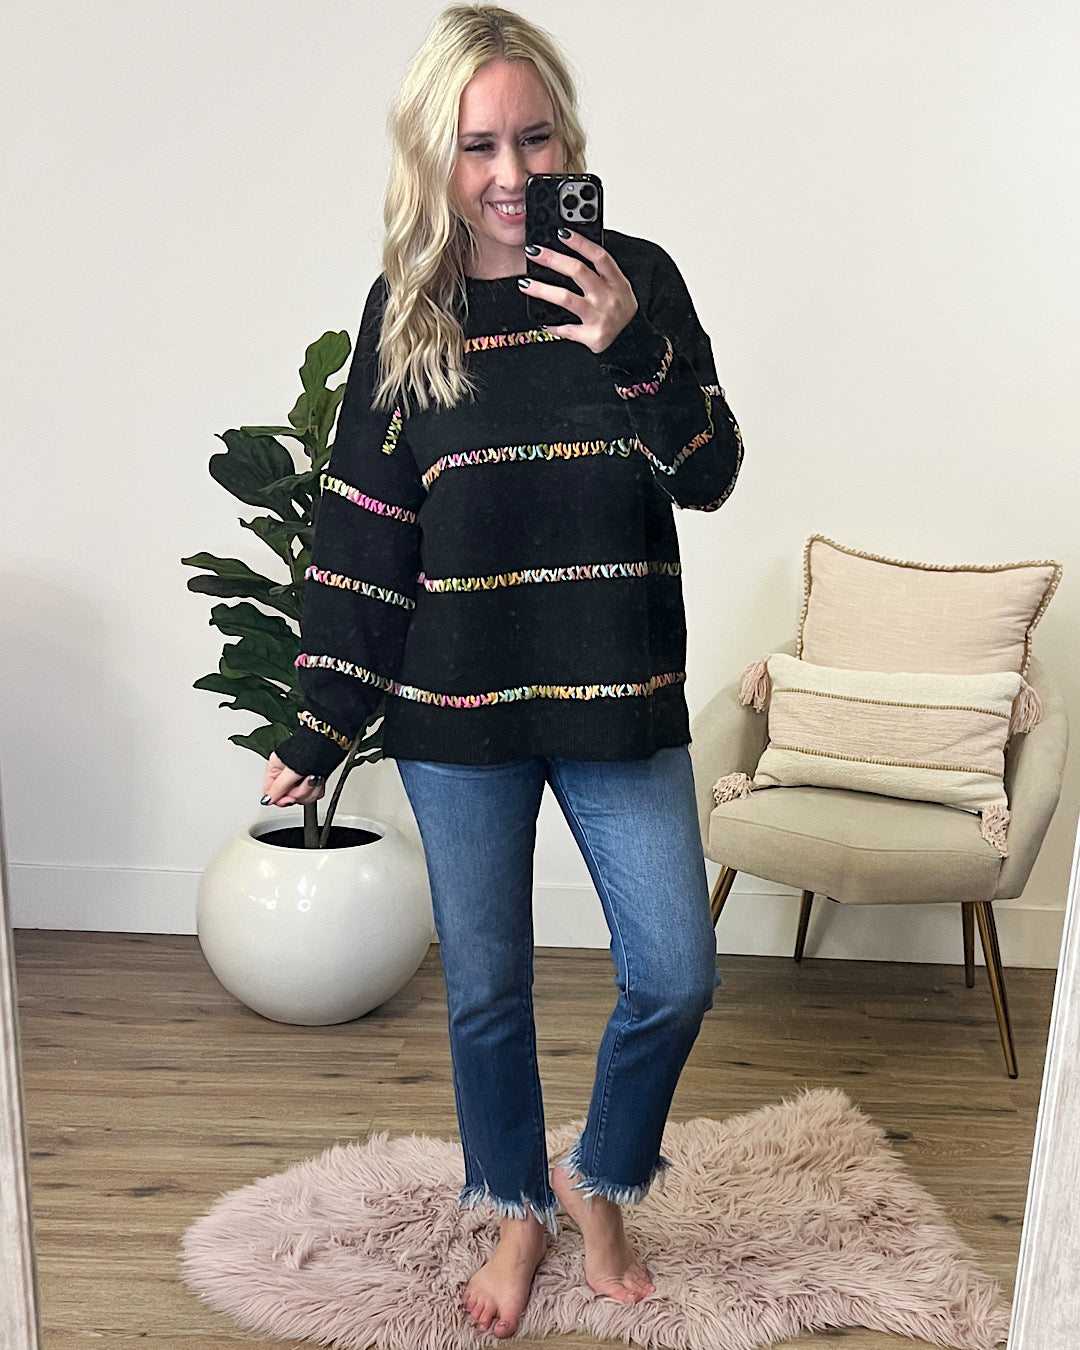 Dodged a Bullet Rainbow Stitch Sweater - Black  Staccato   